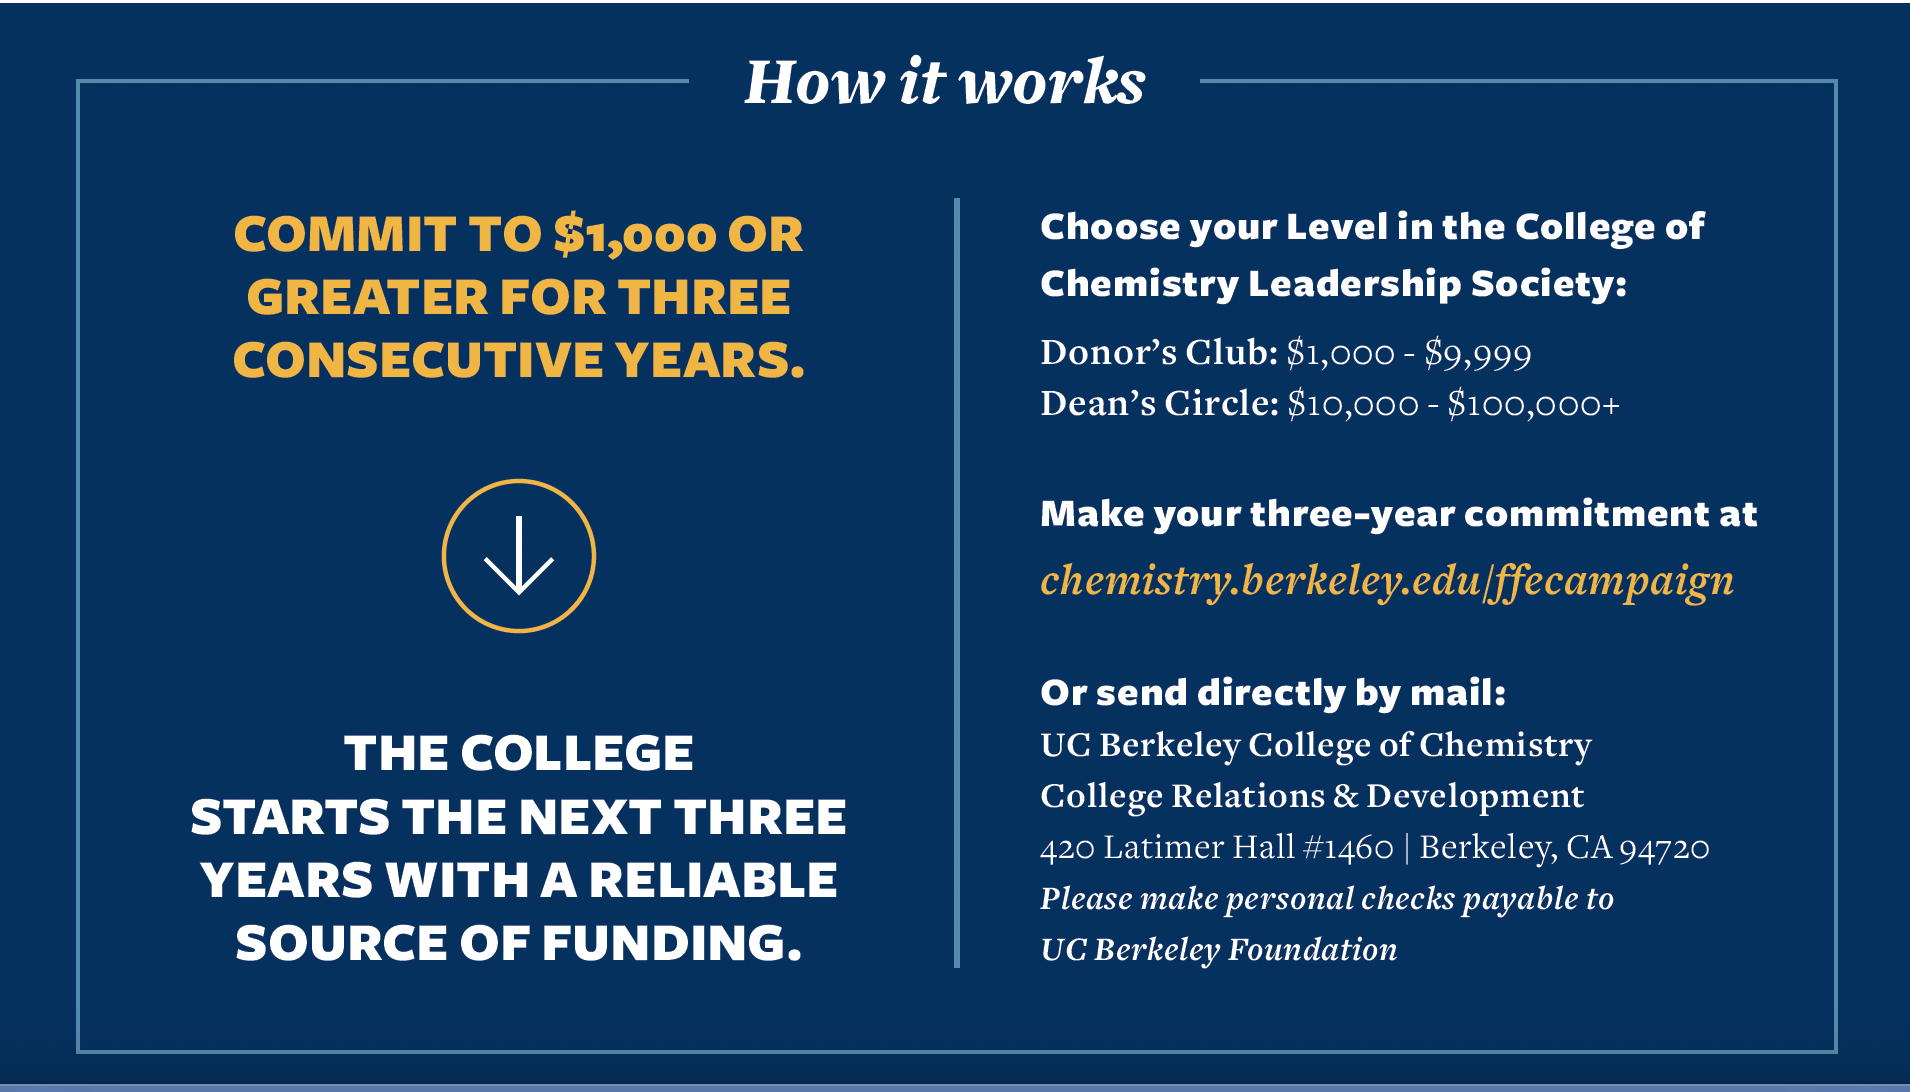 How it works to donate to the College of Chemistry